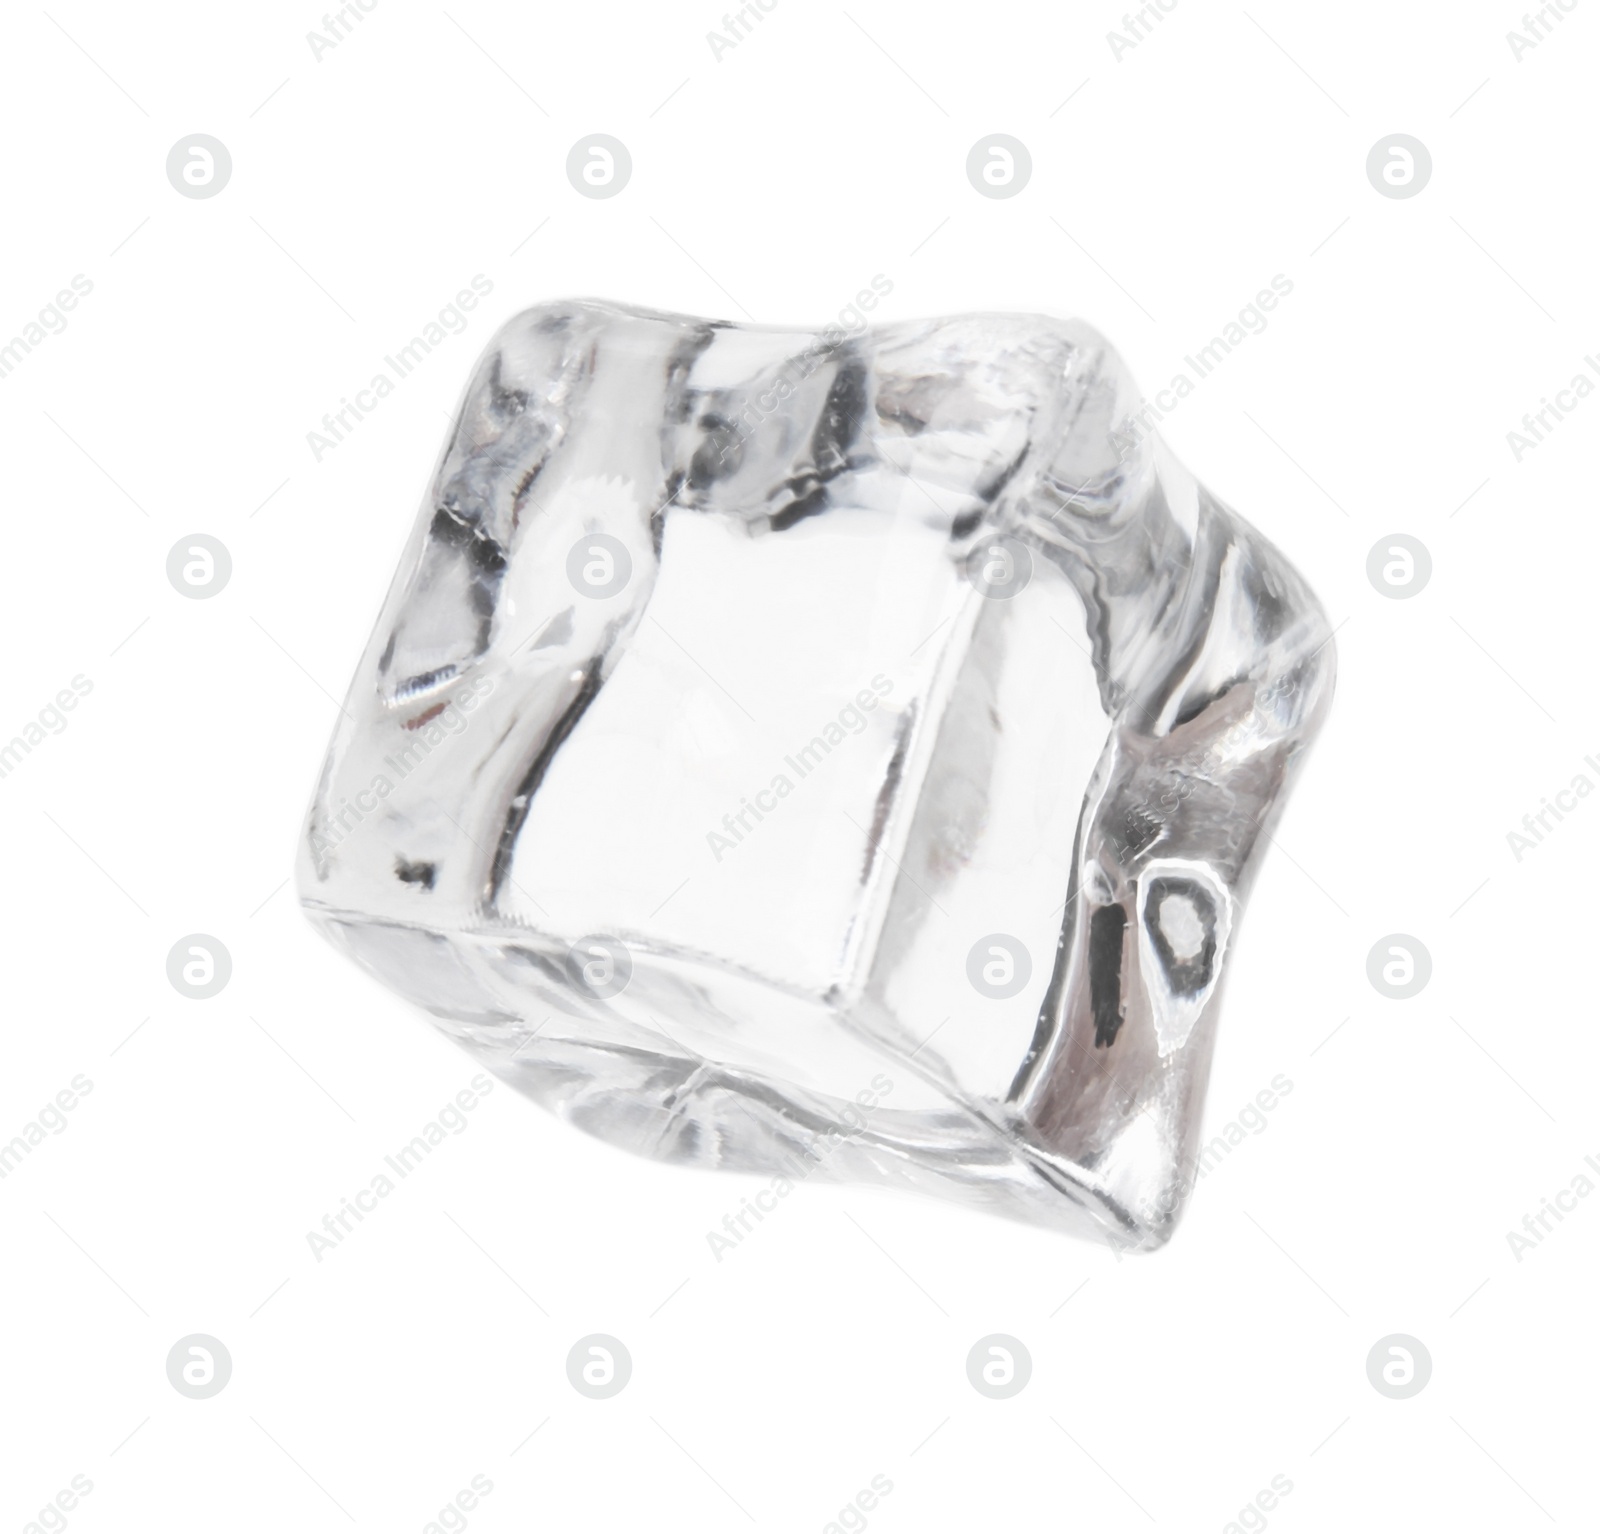 Photo of One crystal clear ice cube isolated on white